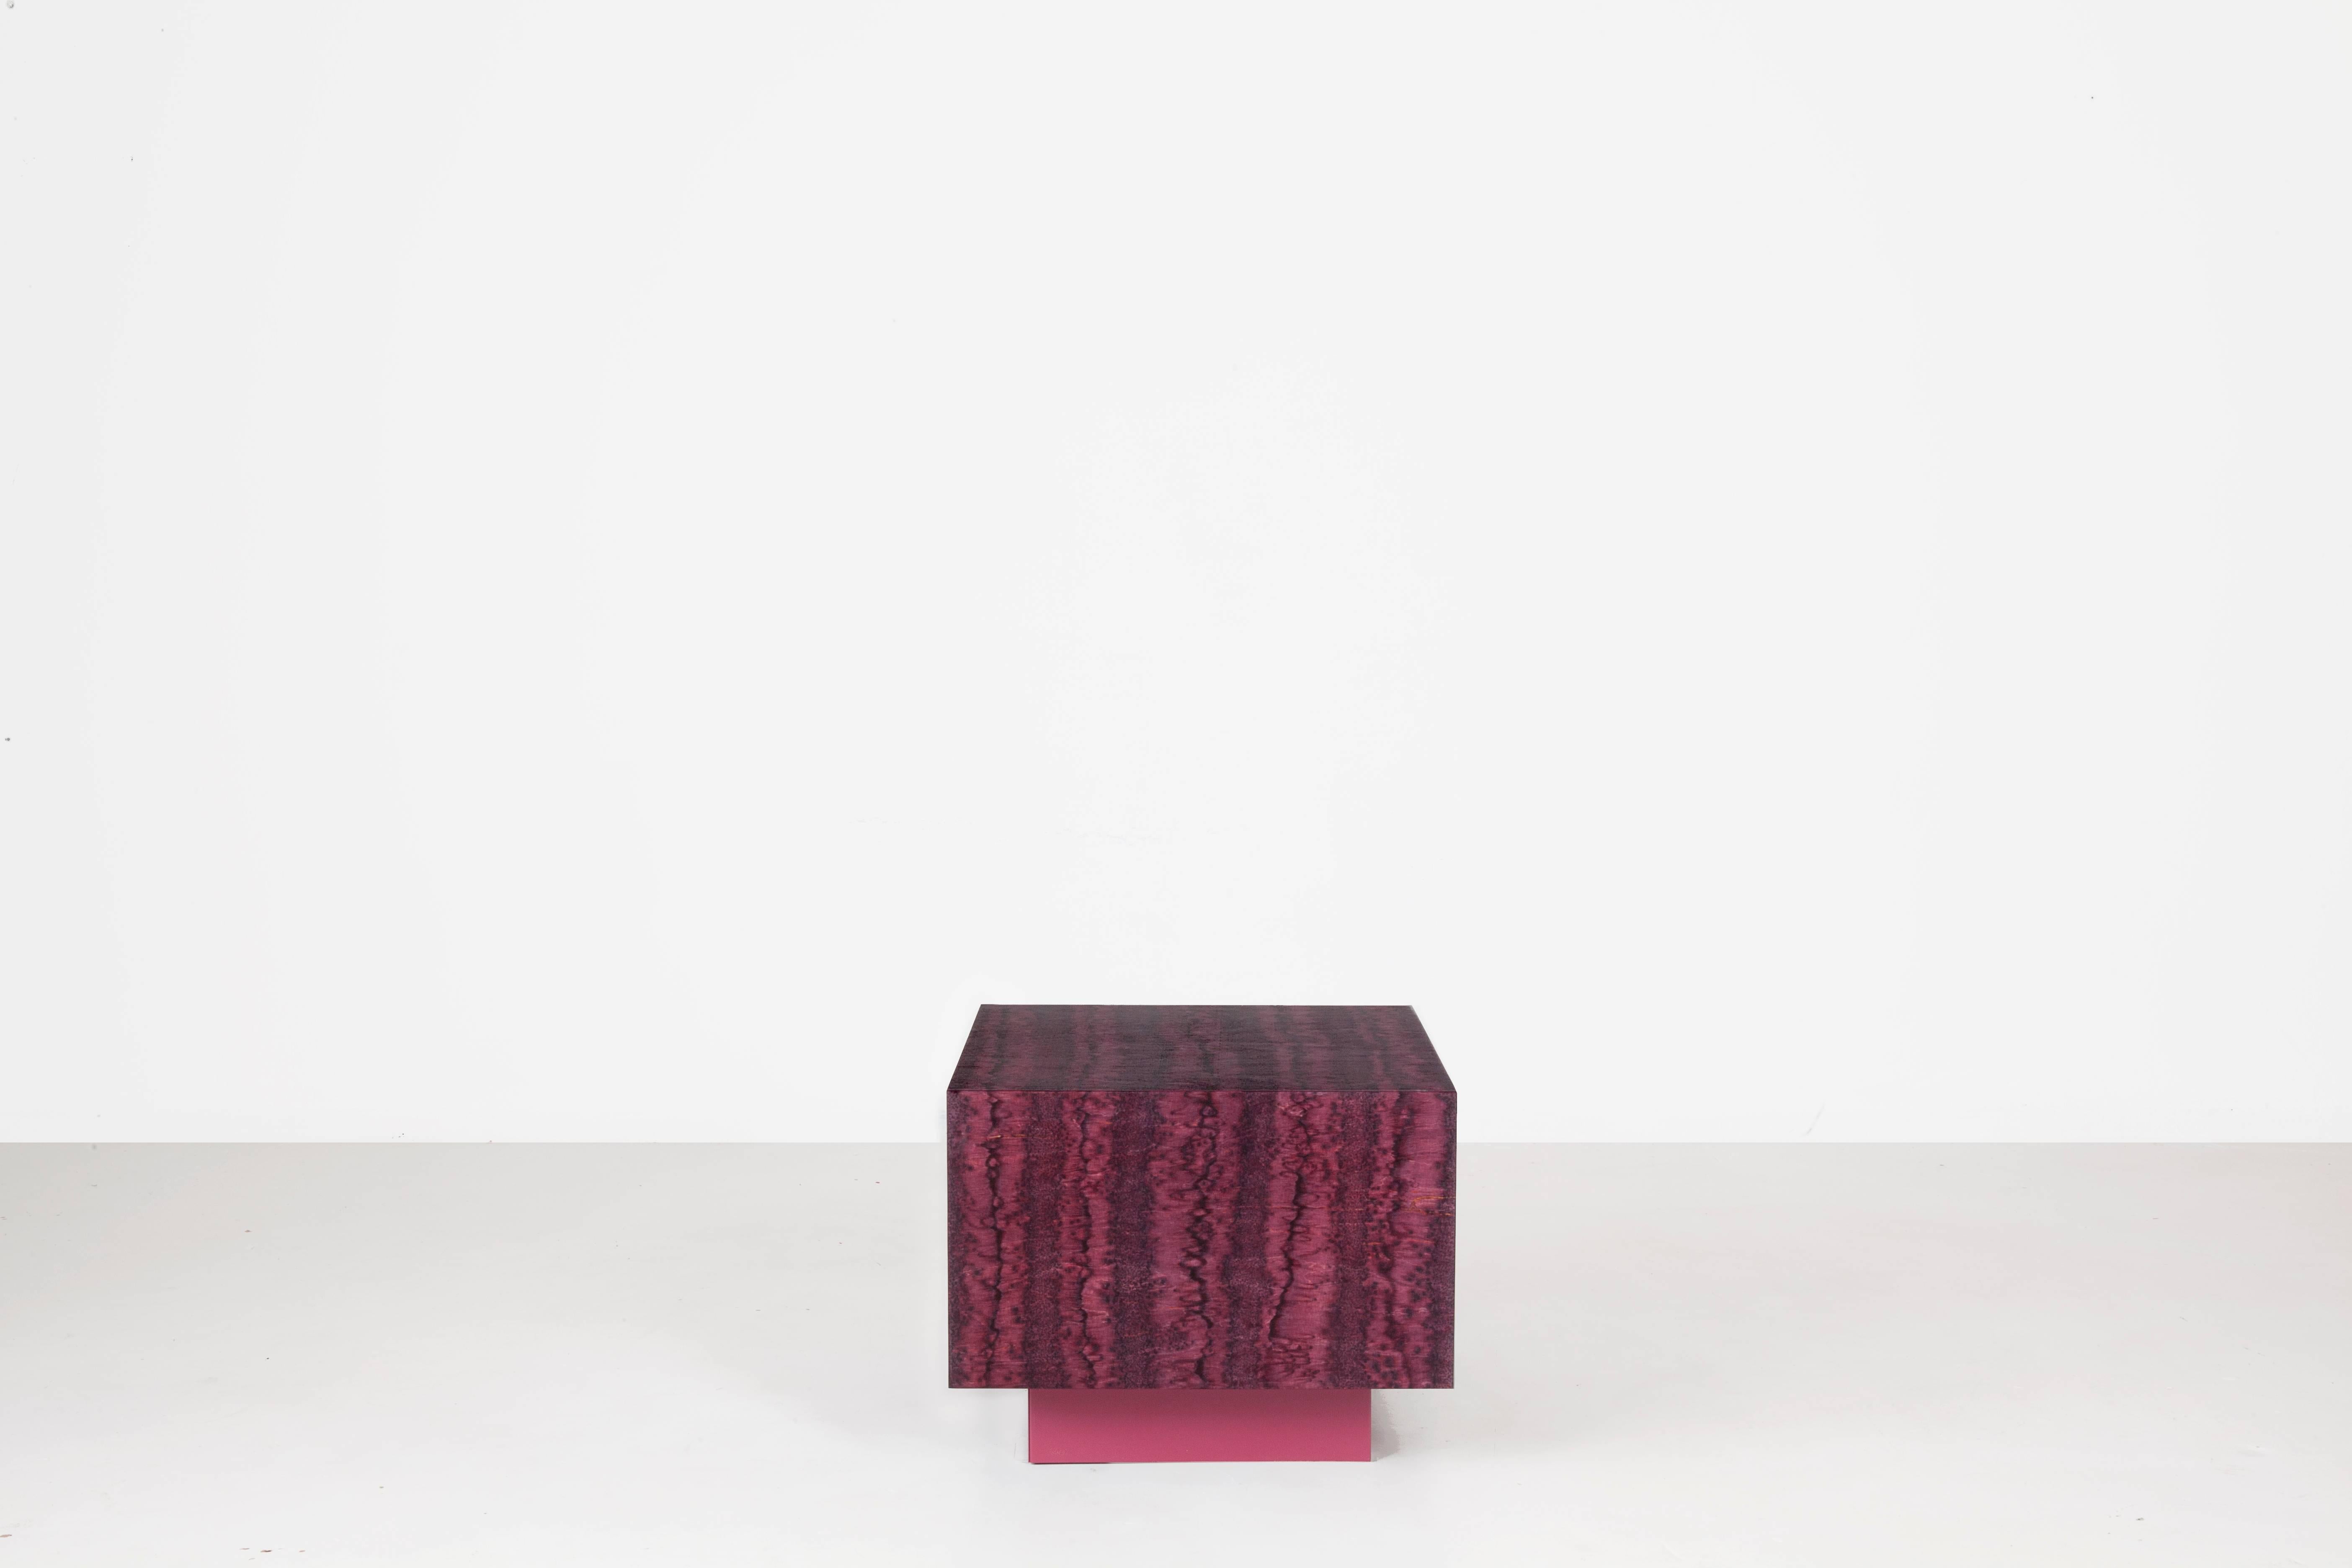 The cube table is part of the first Osis furniture edition. The production started in 2017. Osis table tops are made of salt-treated birch, with the base being made of powder-coated steel. This is the red striped version. The surface finish Osis is